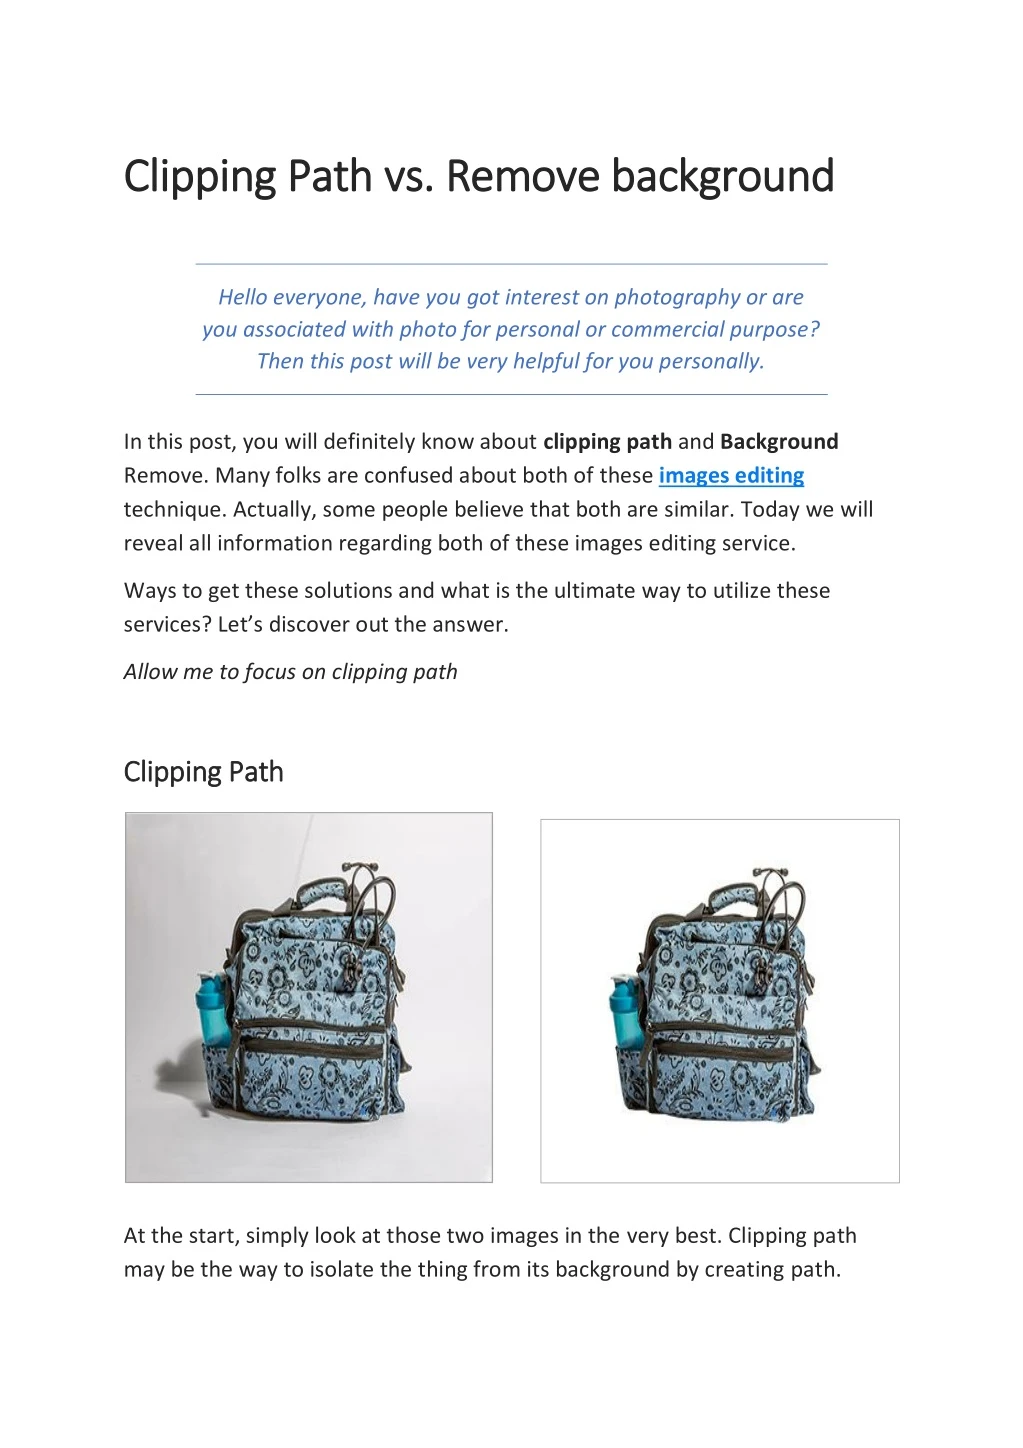 clipping path vs remove background clipping path